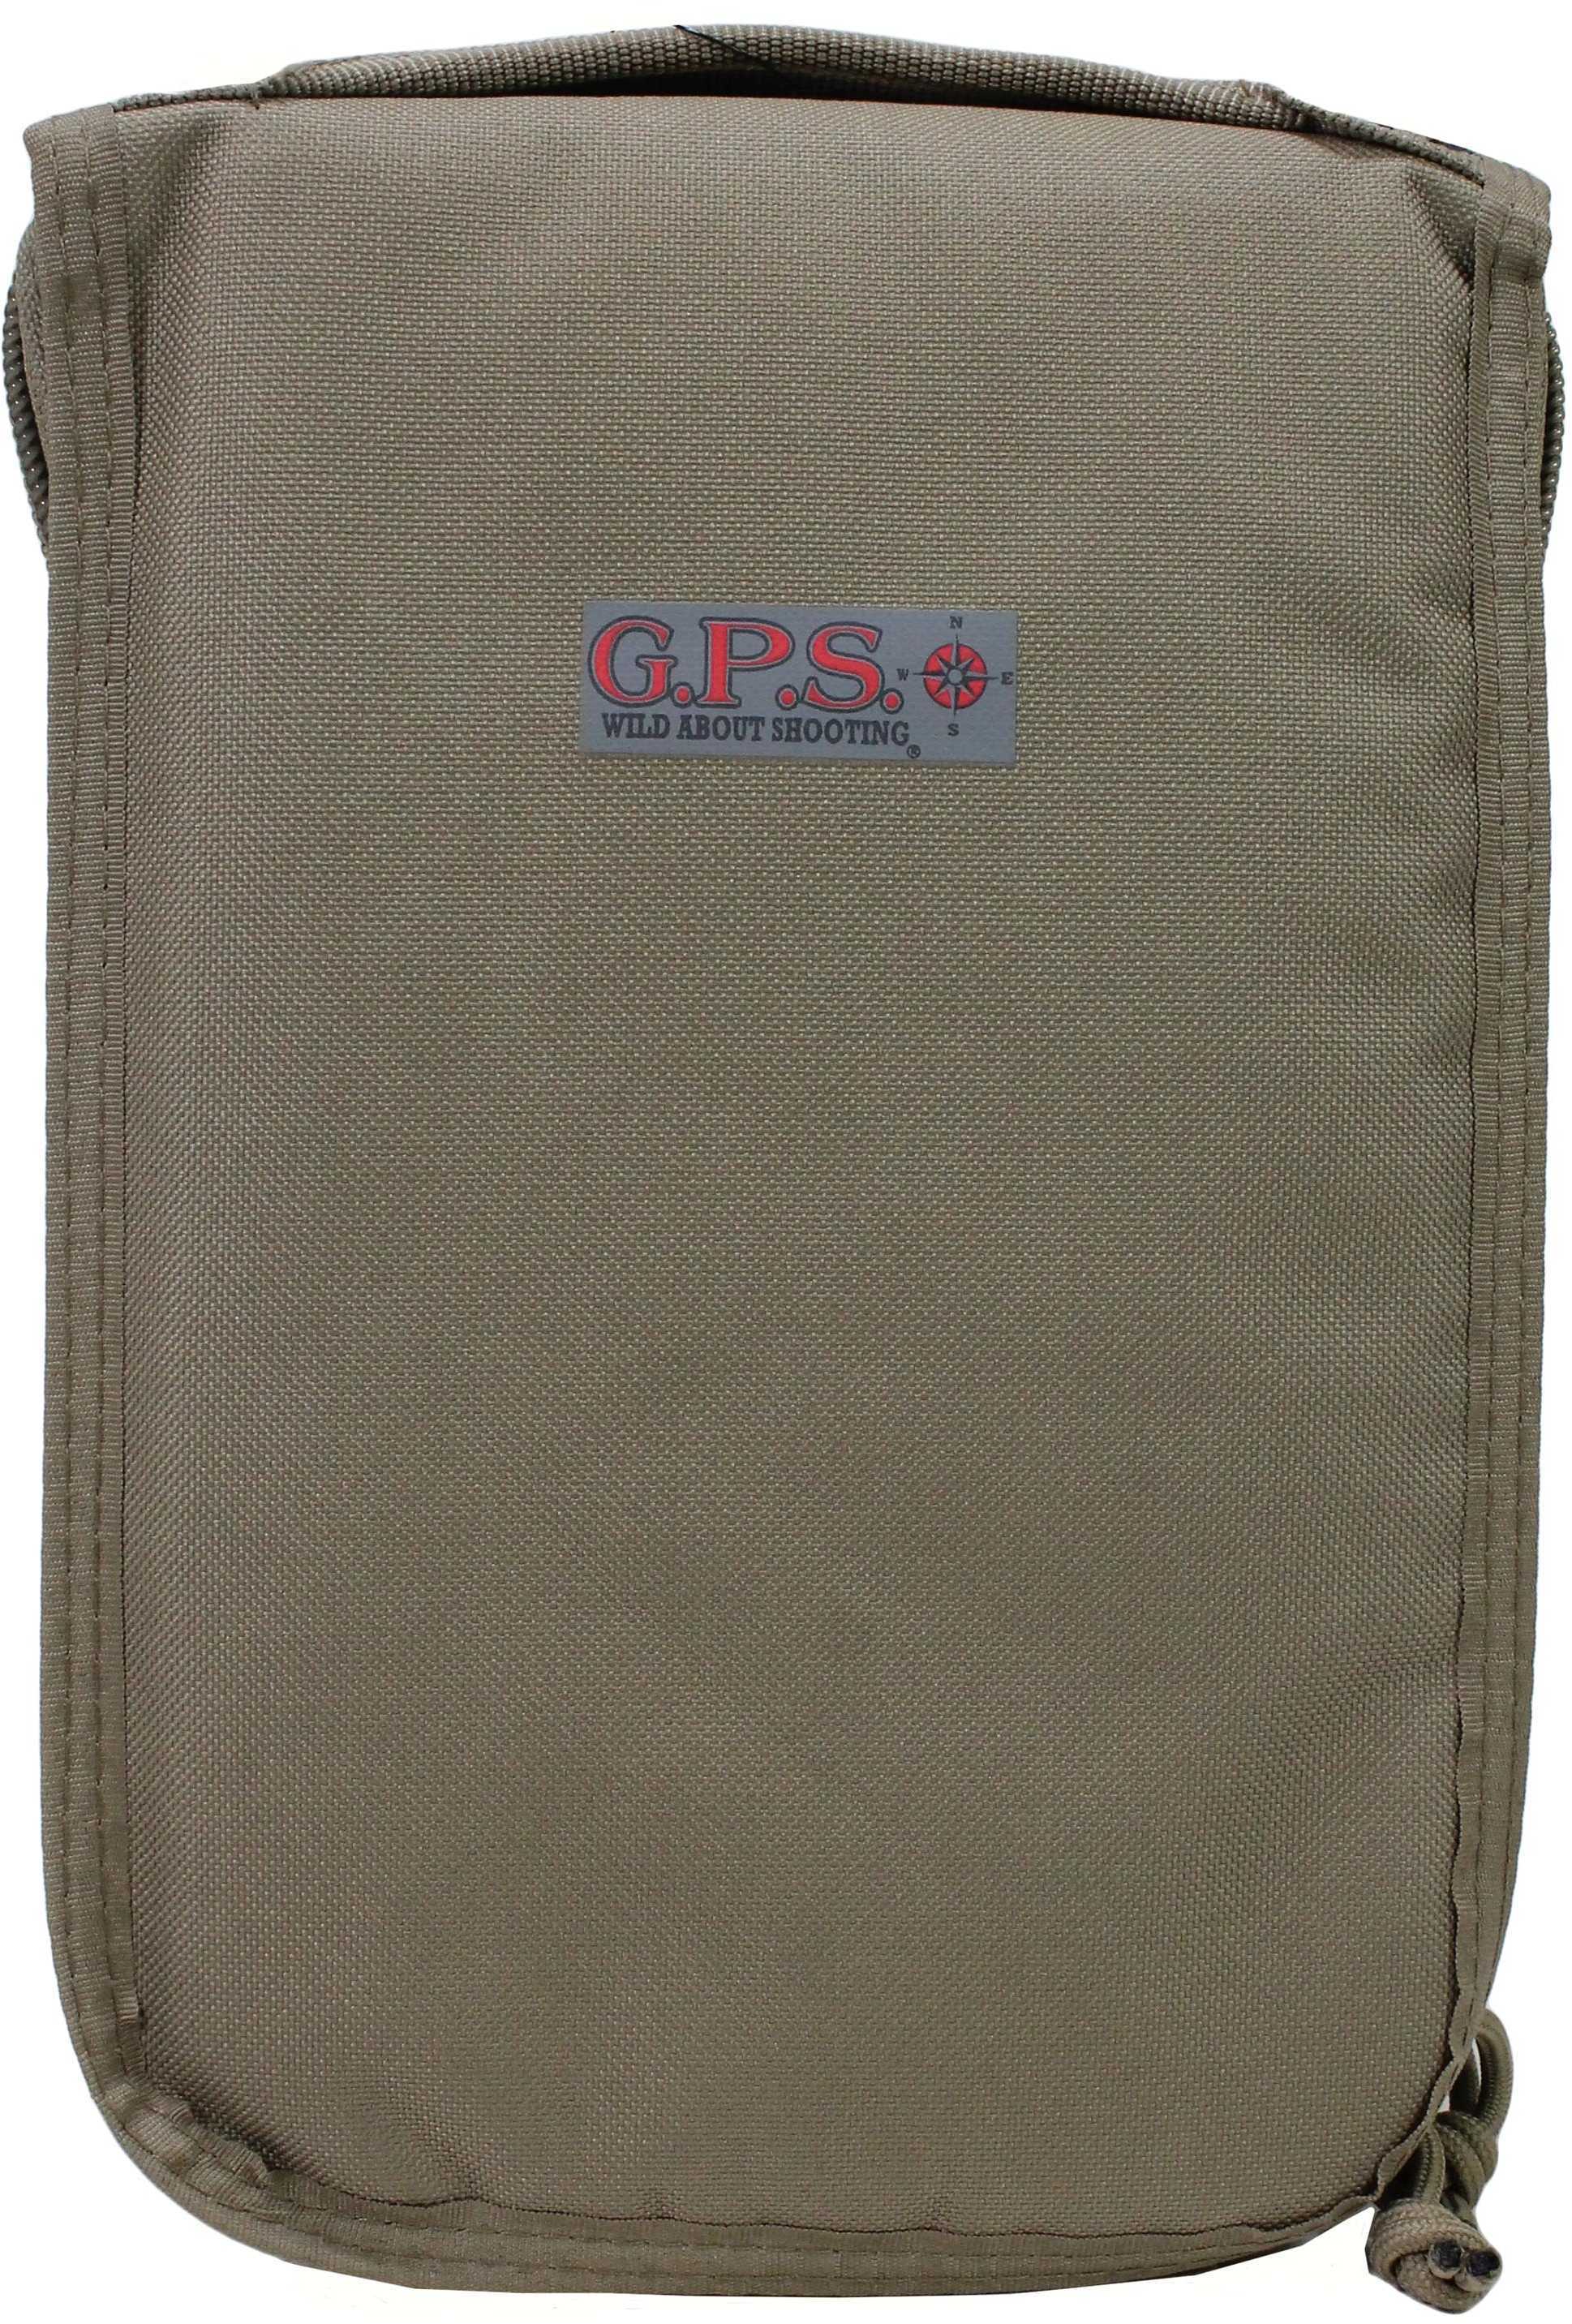 G Outdoors Tactical Pistol Case Range Backpack Tan Md: GPS-T1175PCT